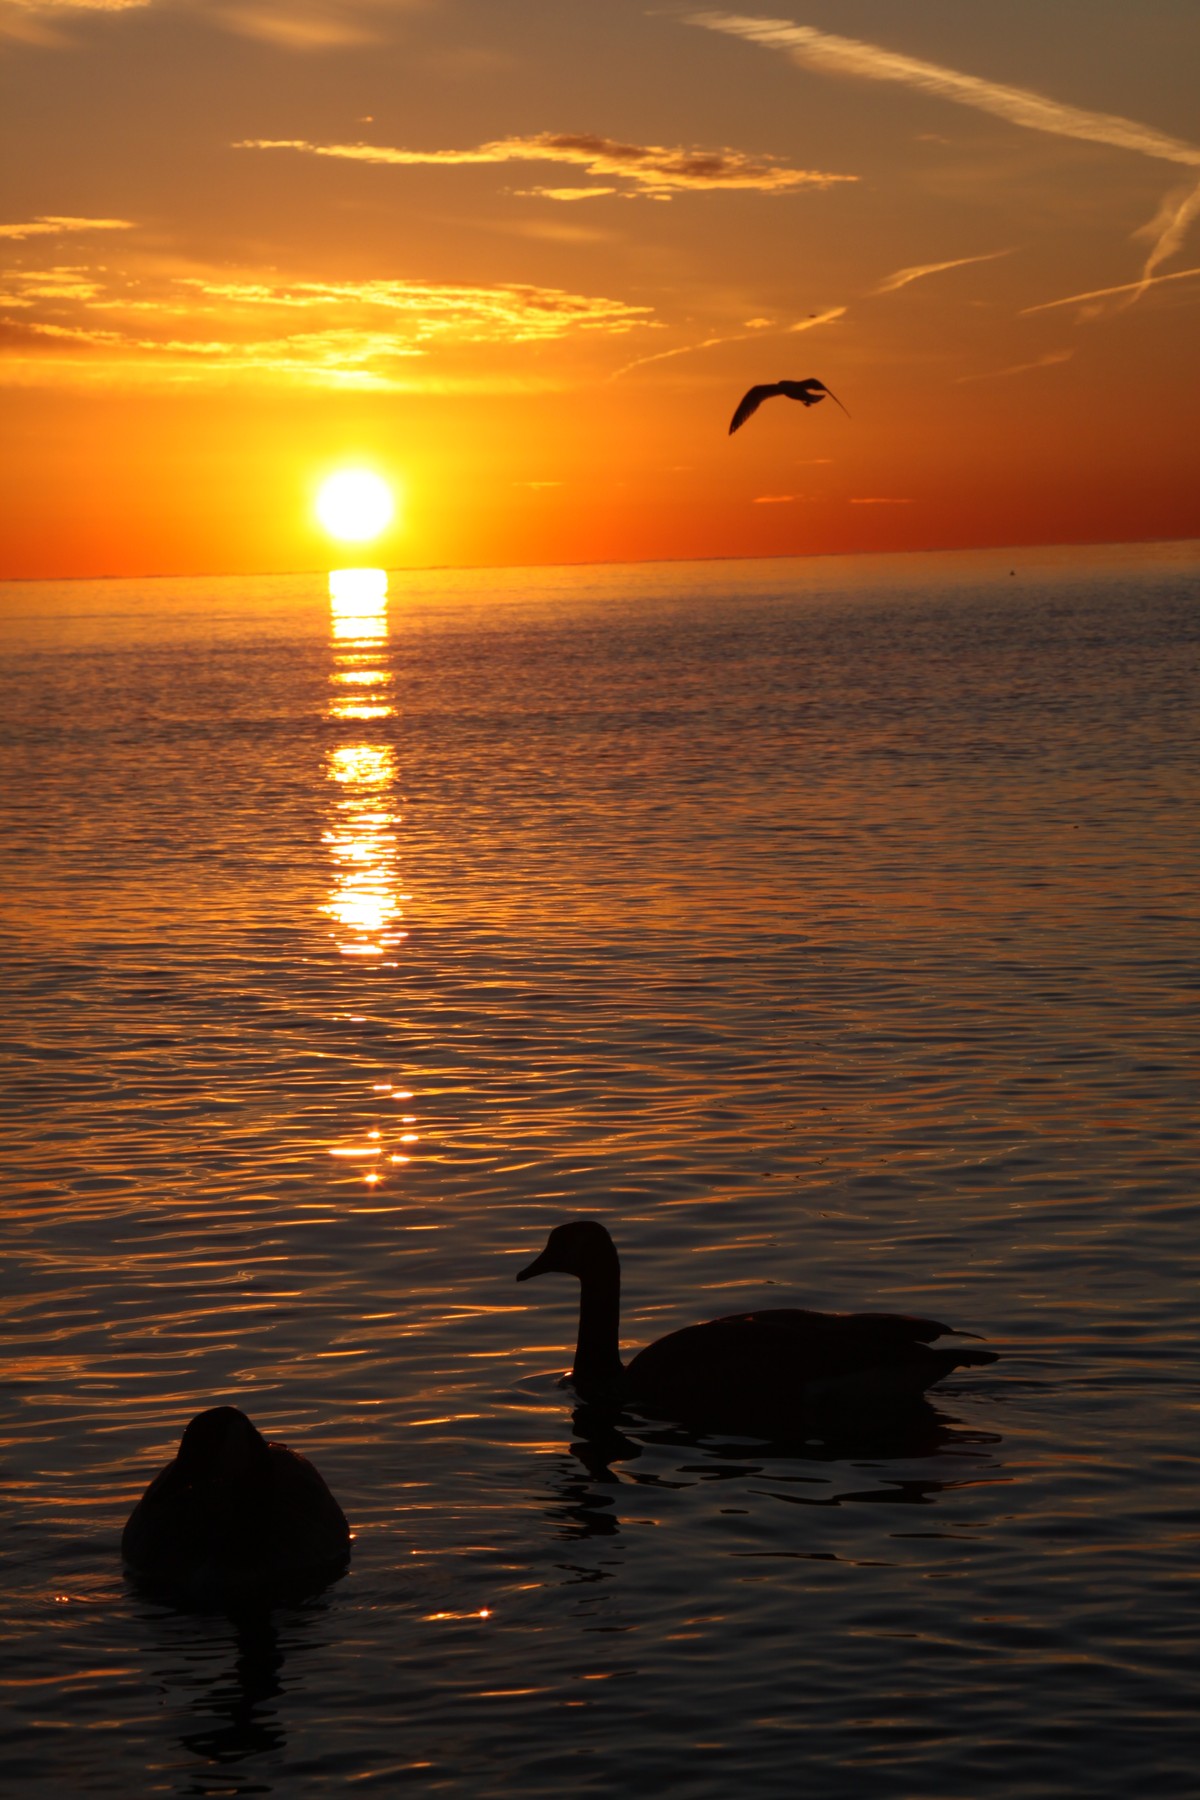 Sunrise over lake ontario with swans | lam_chihang  -  Foter  -  CC BY 2.0